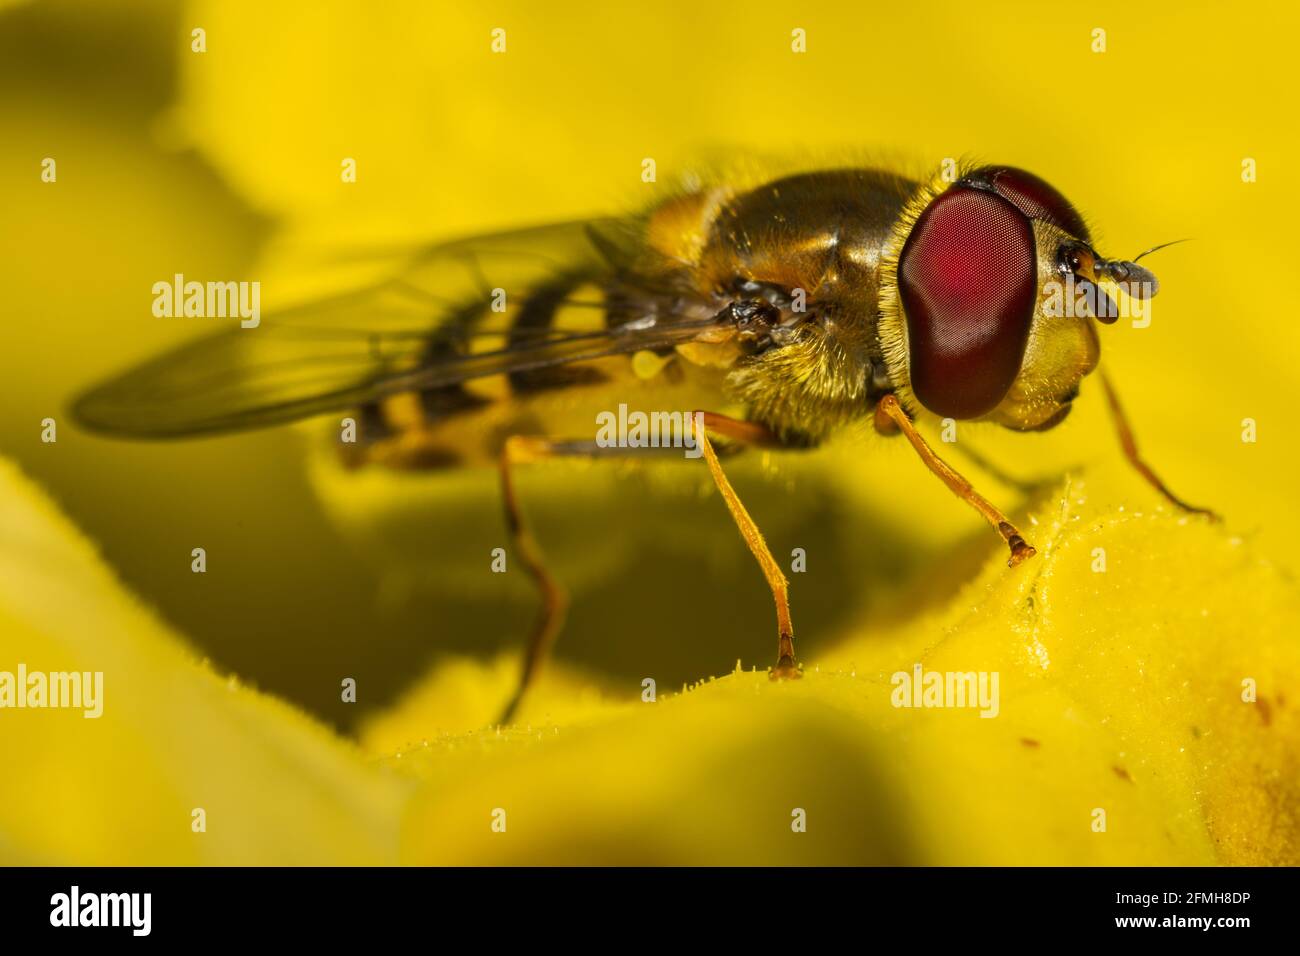 Side view of a hoverfly (syrphid fly) resting on some yellow leaves. Its big red compound eyes being the main subject of focus Stock Photo